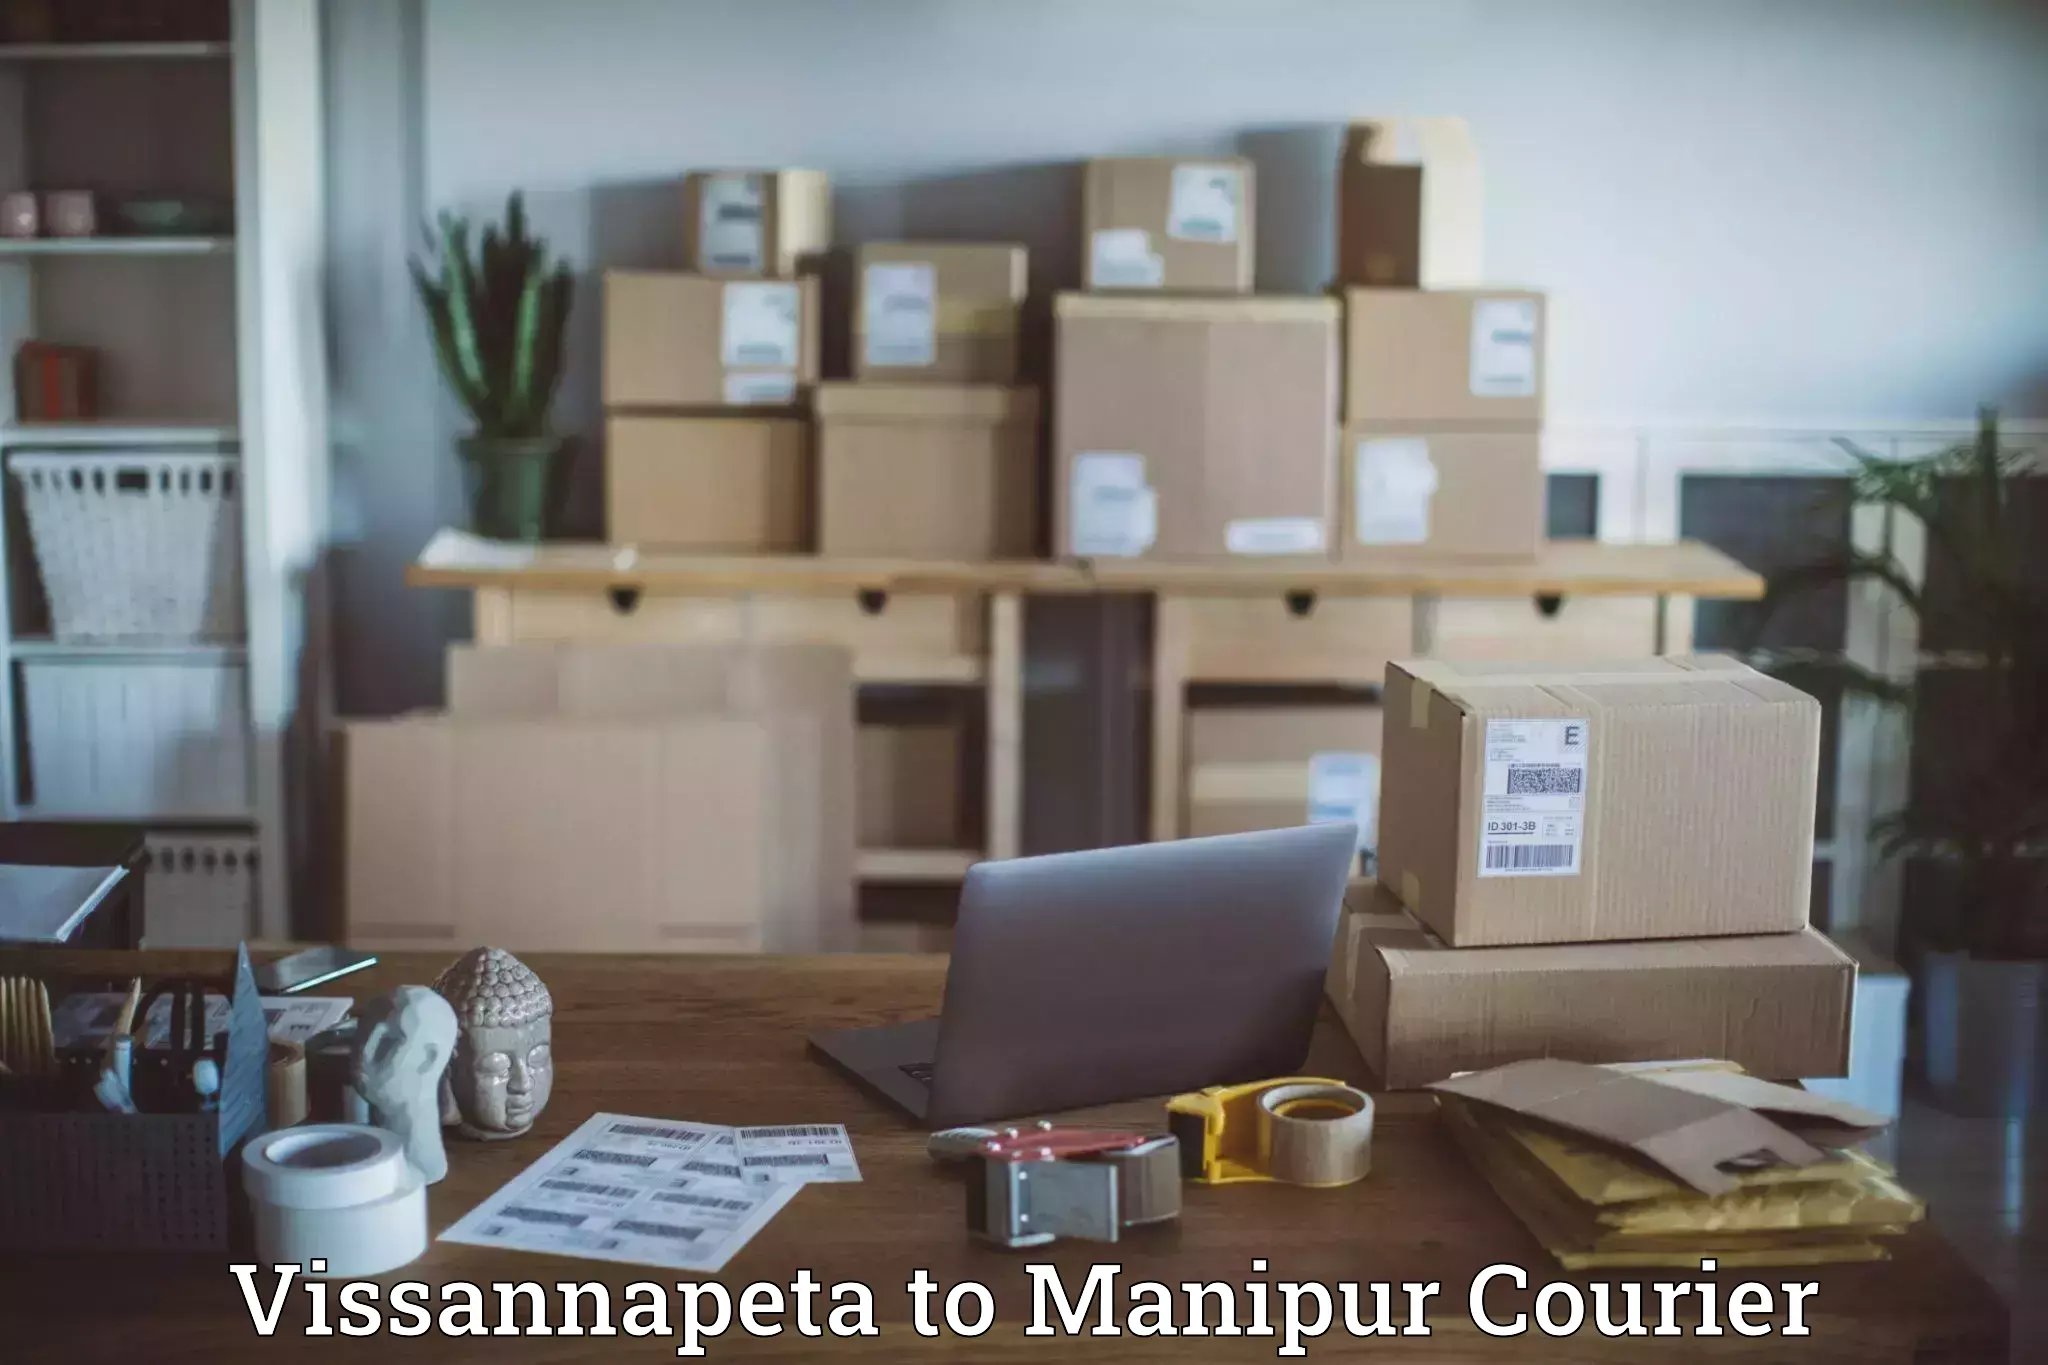 Overnight delivery services Vissannapeta to Manipur